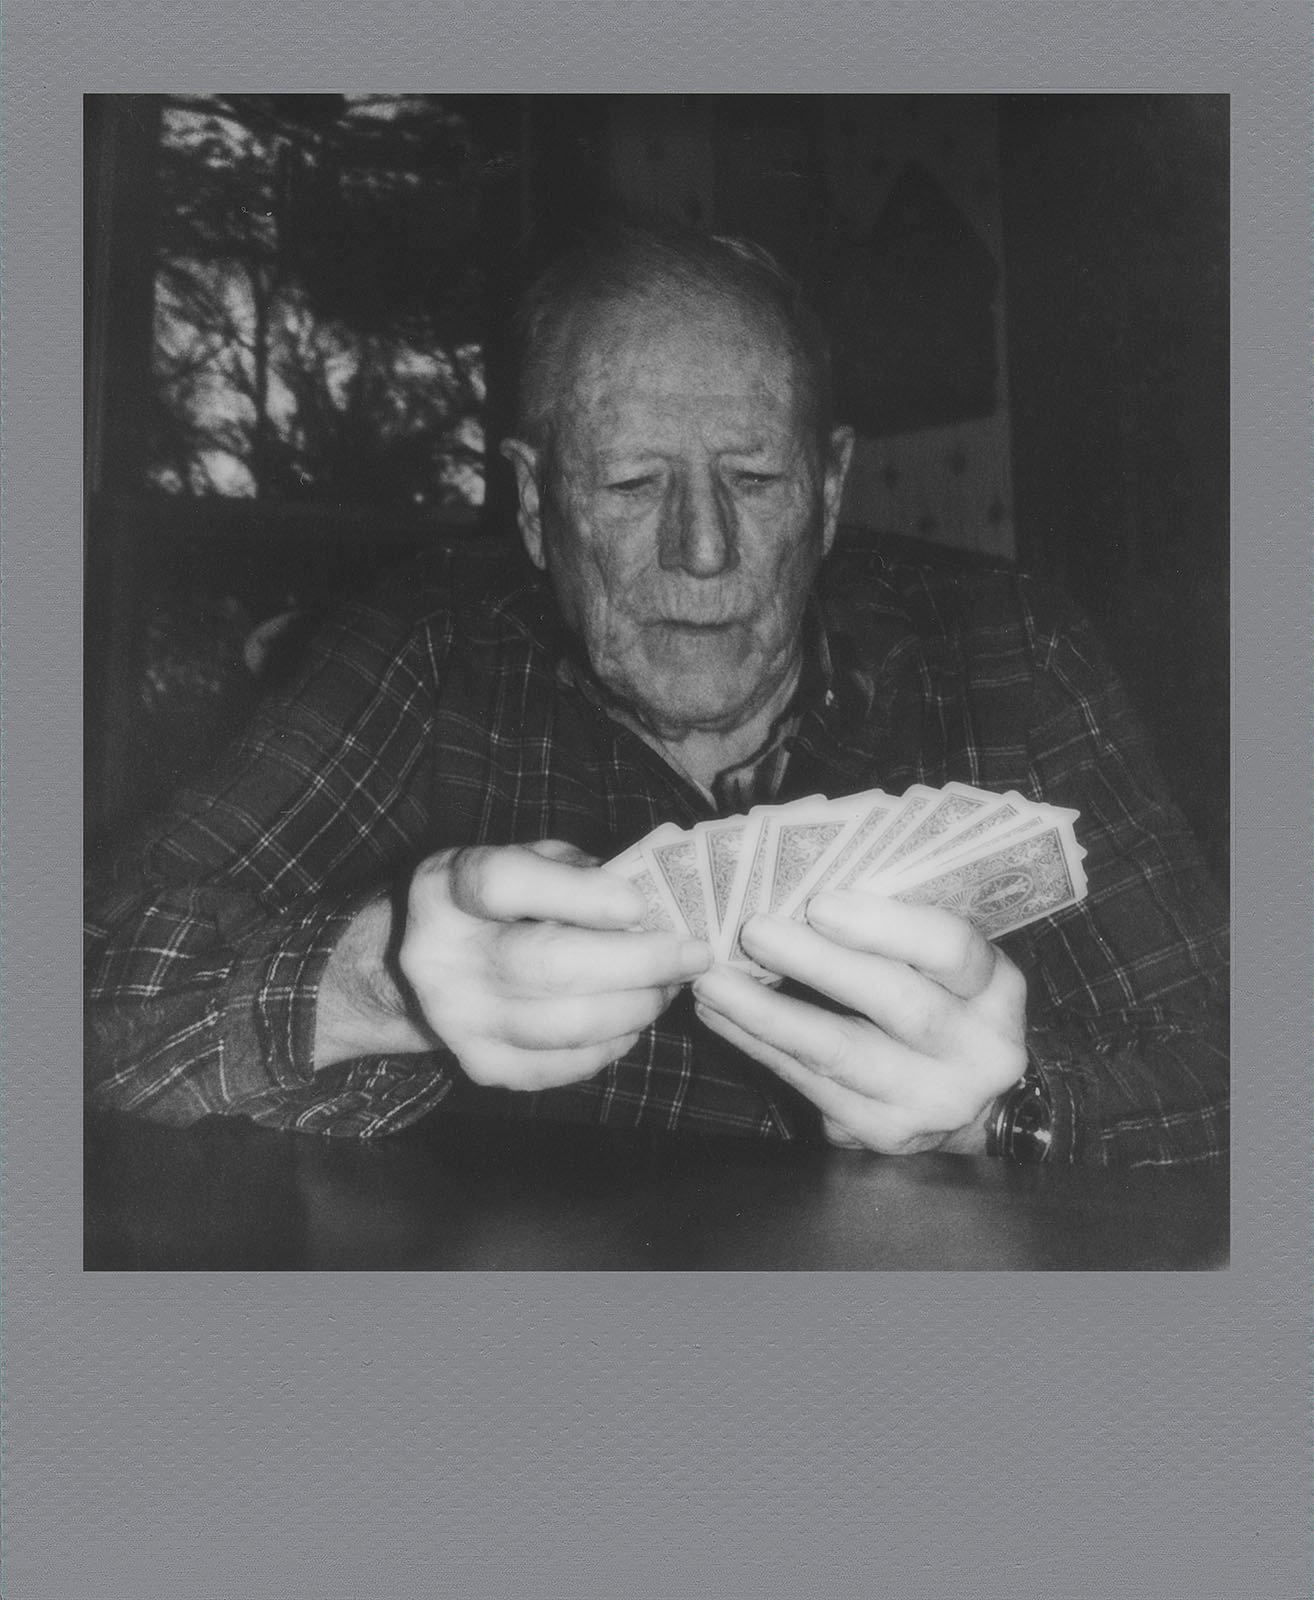 Elderly man sitting at a table, concentrating as he looks at a hand of playing cards. the setting appears indoors, and the photo has a vintage, black and white polaroid style.